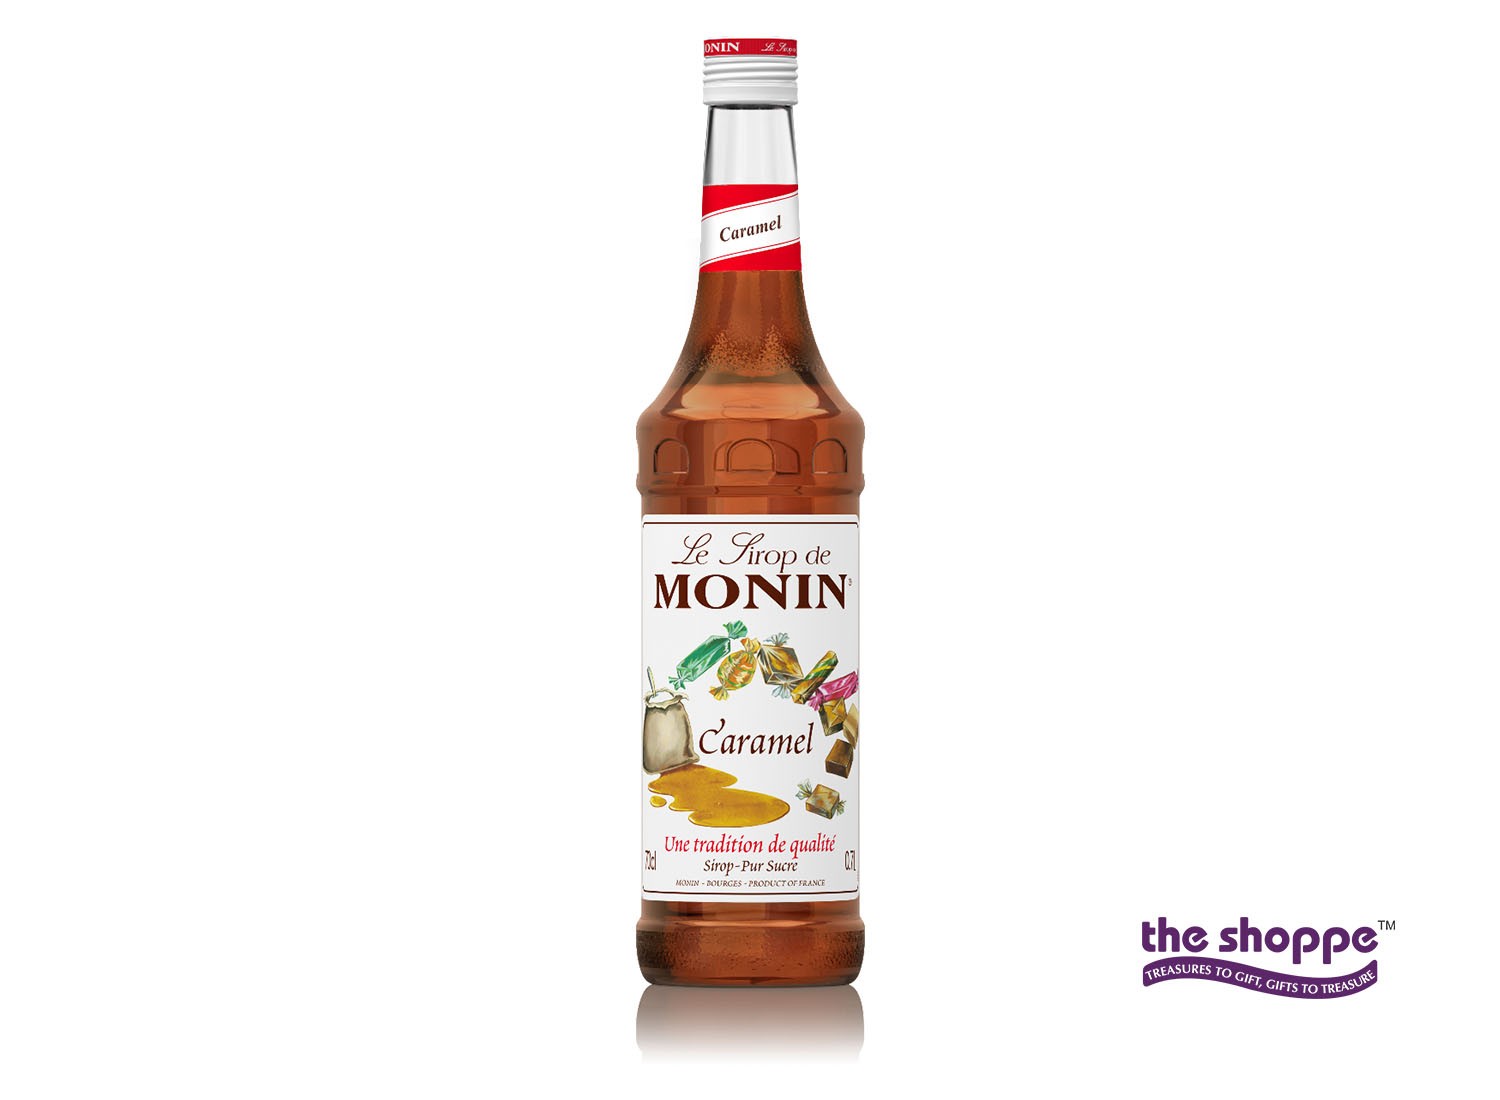 https://theshoppe.in/media/catalog/product/cache/1/image/1500x/040ec09b1e35df139433887a97daa66f/m/o/monin-caramel.jpg